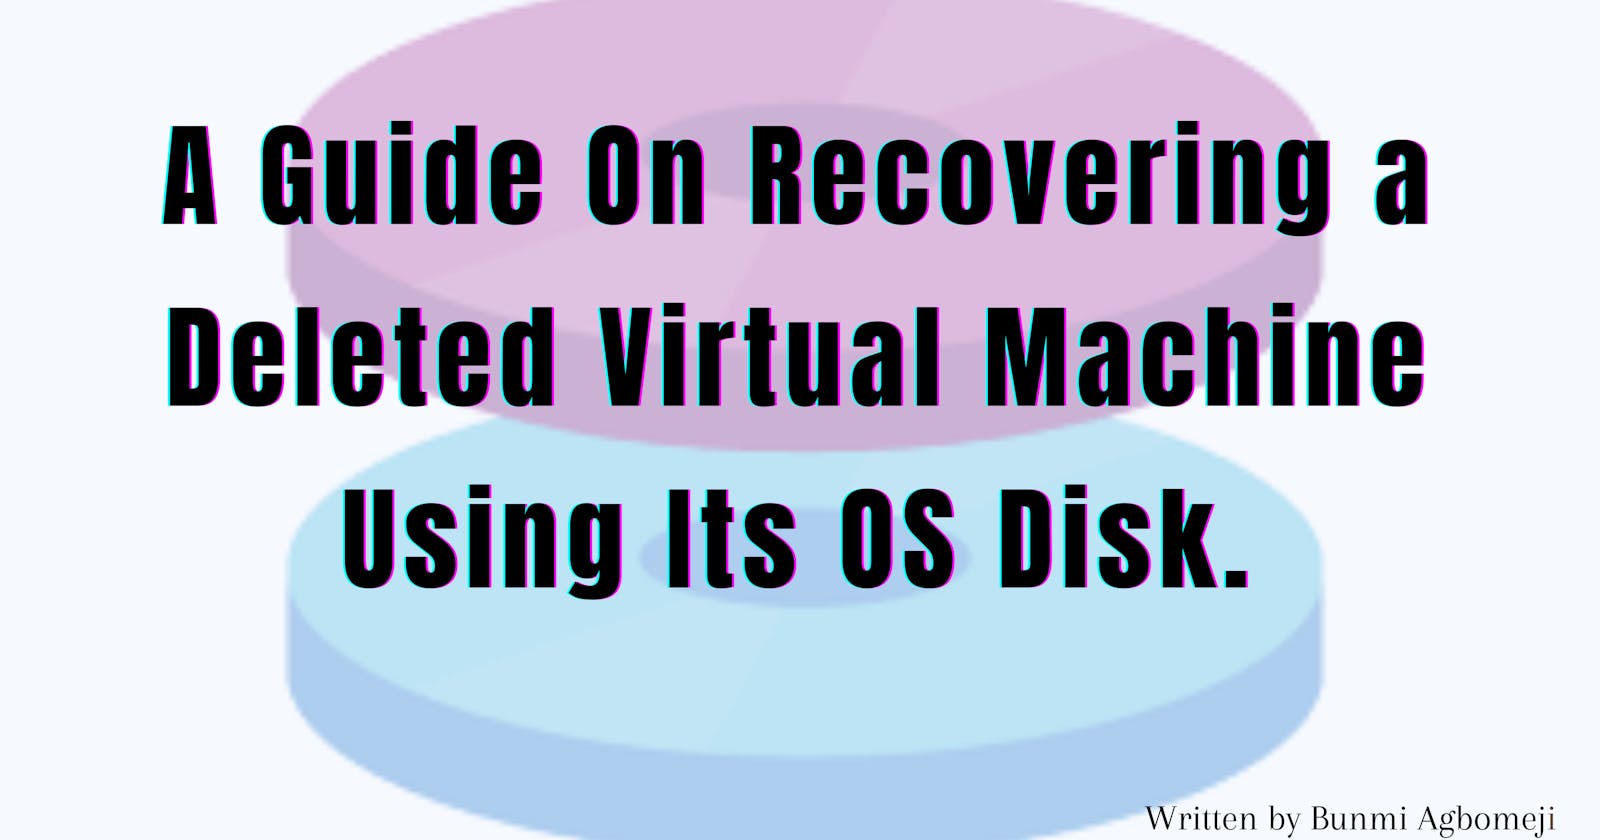 A Guide on Recovering a Deleted Virtual Machine Using Its OS disk.